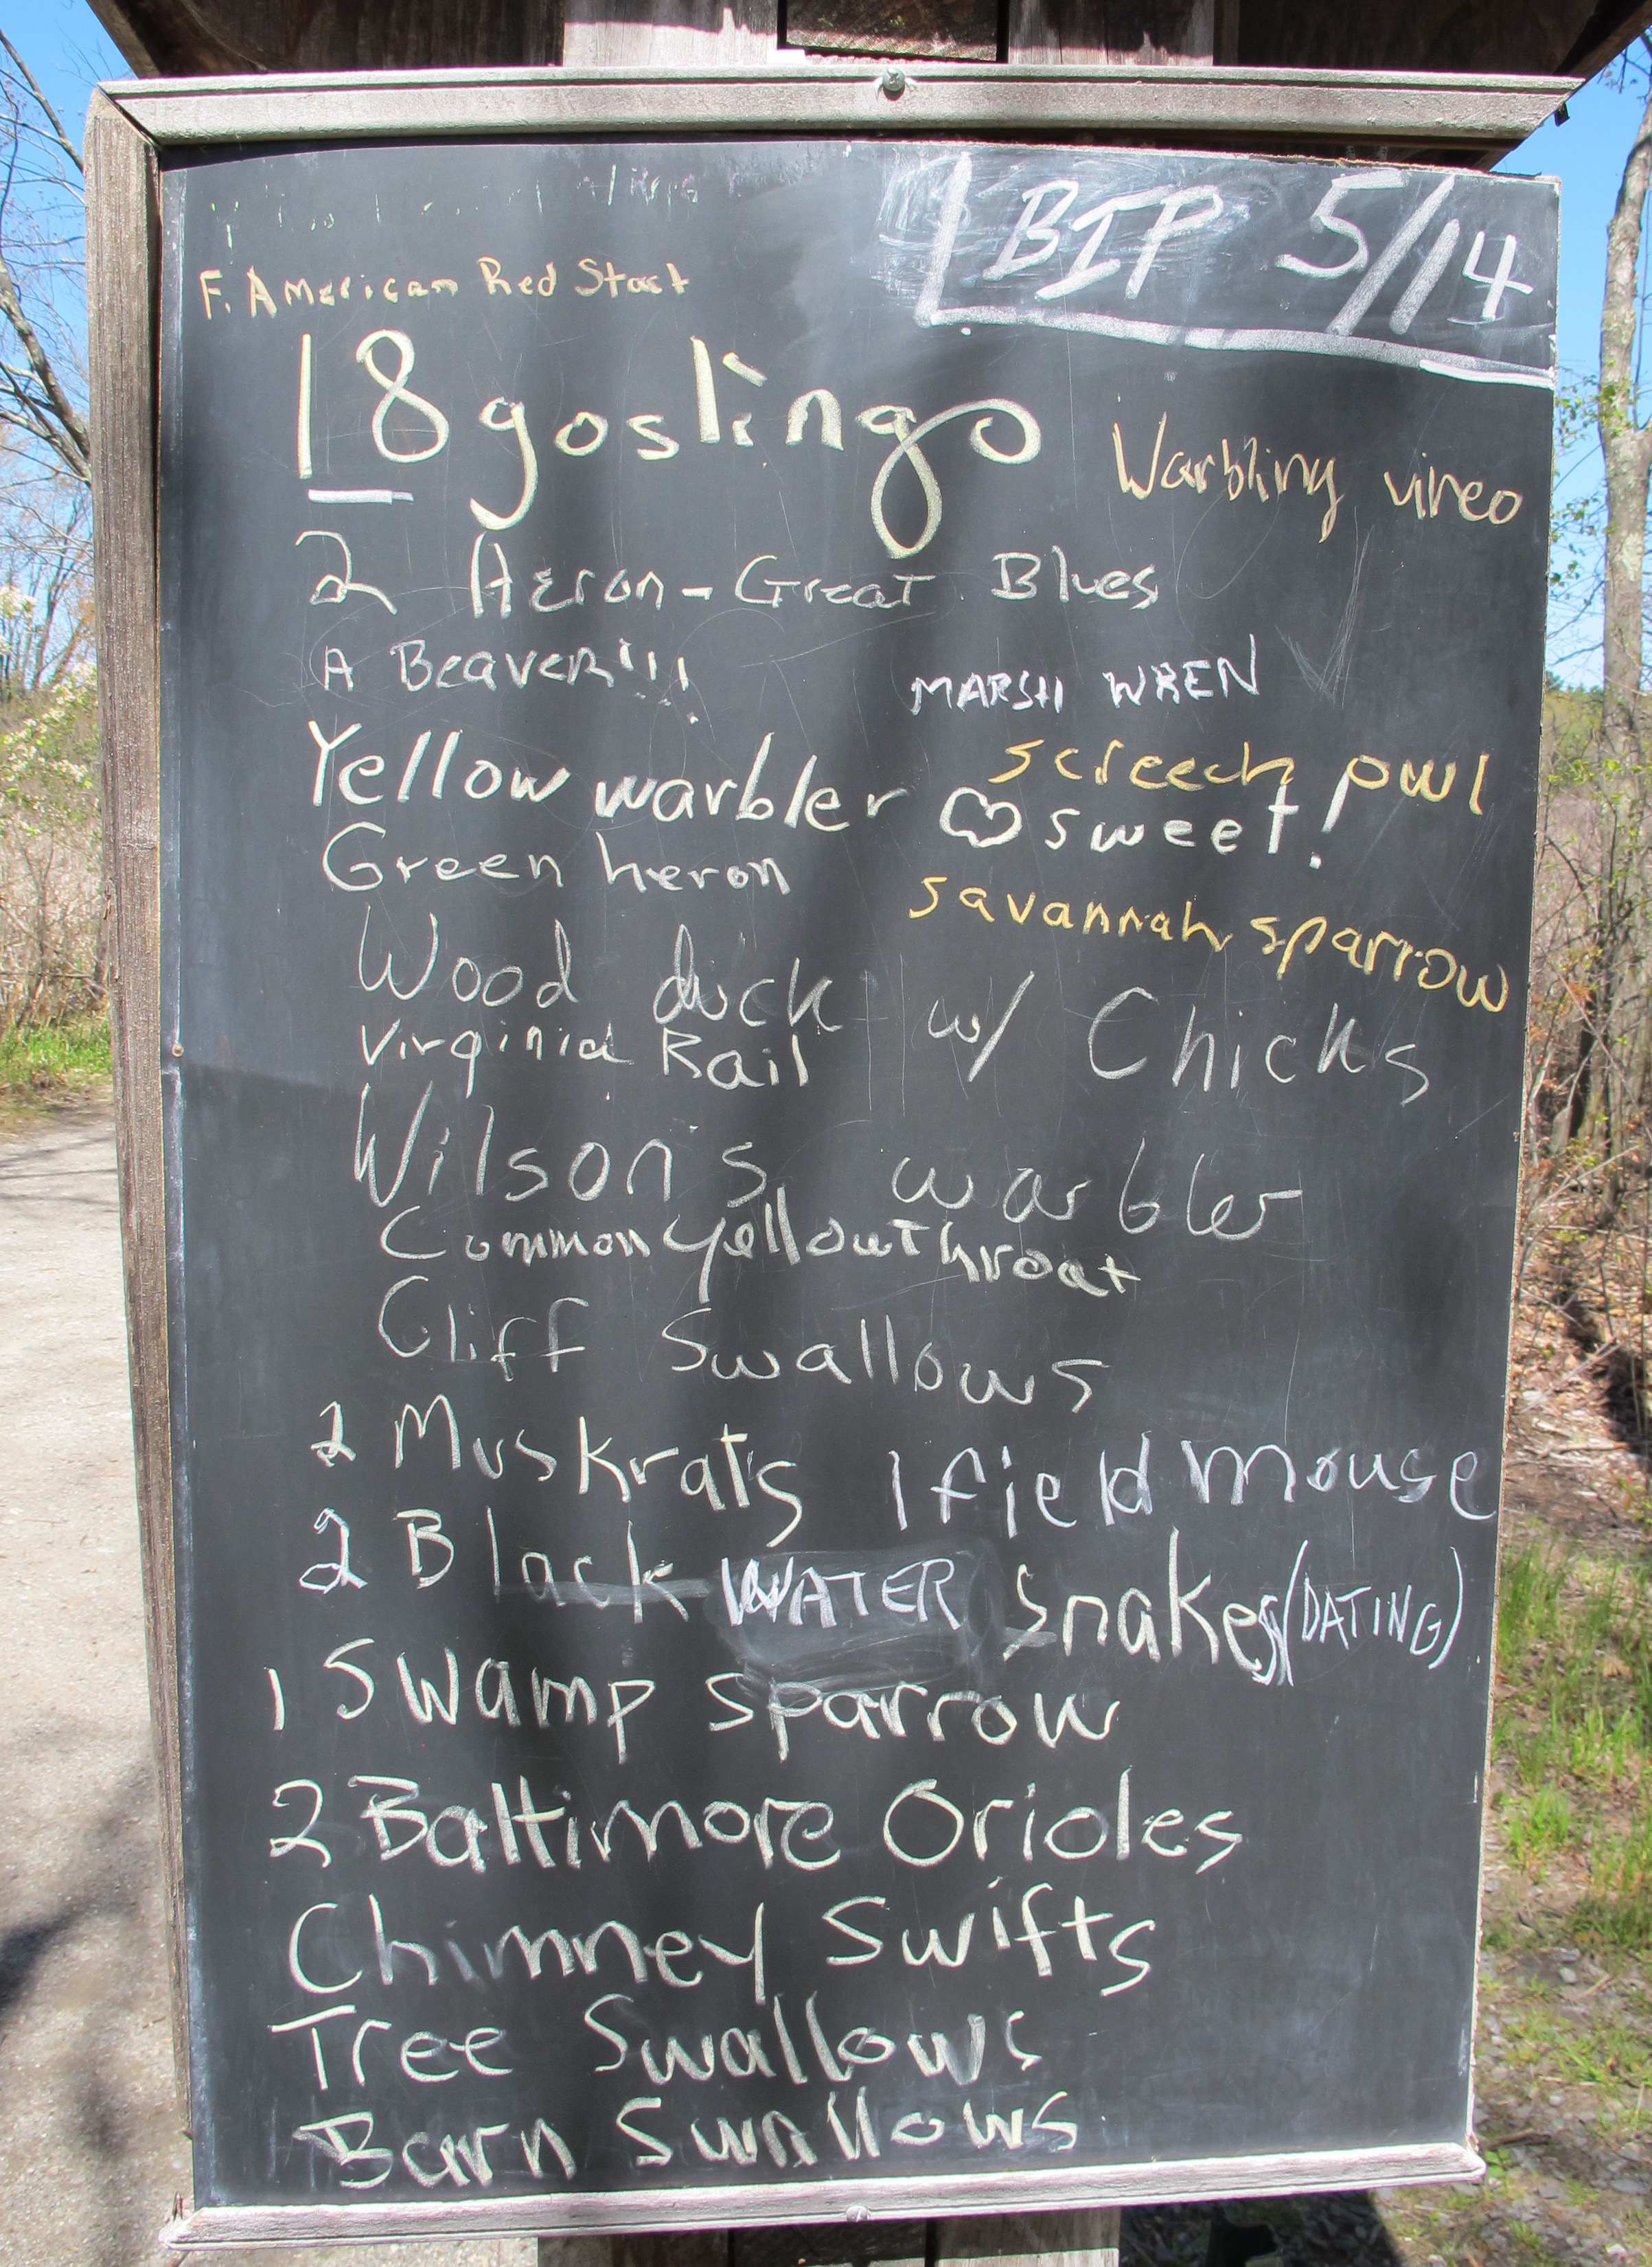 The bird-sightings board at Great Meadows